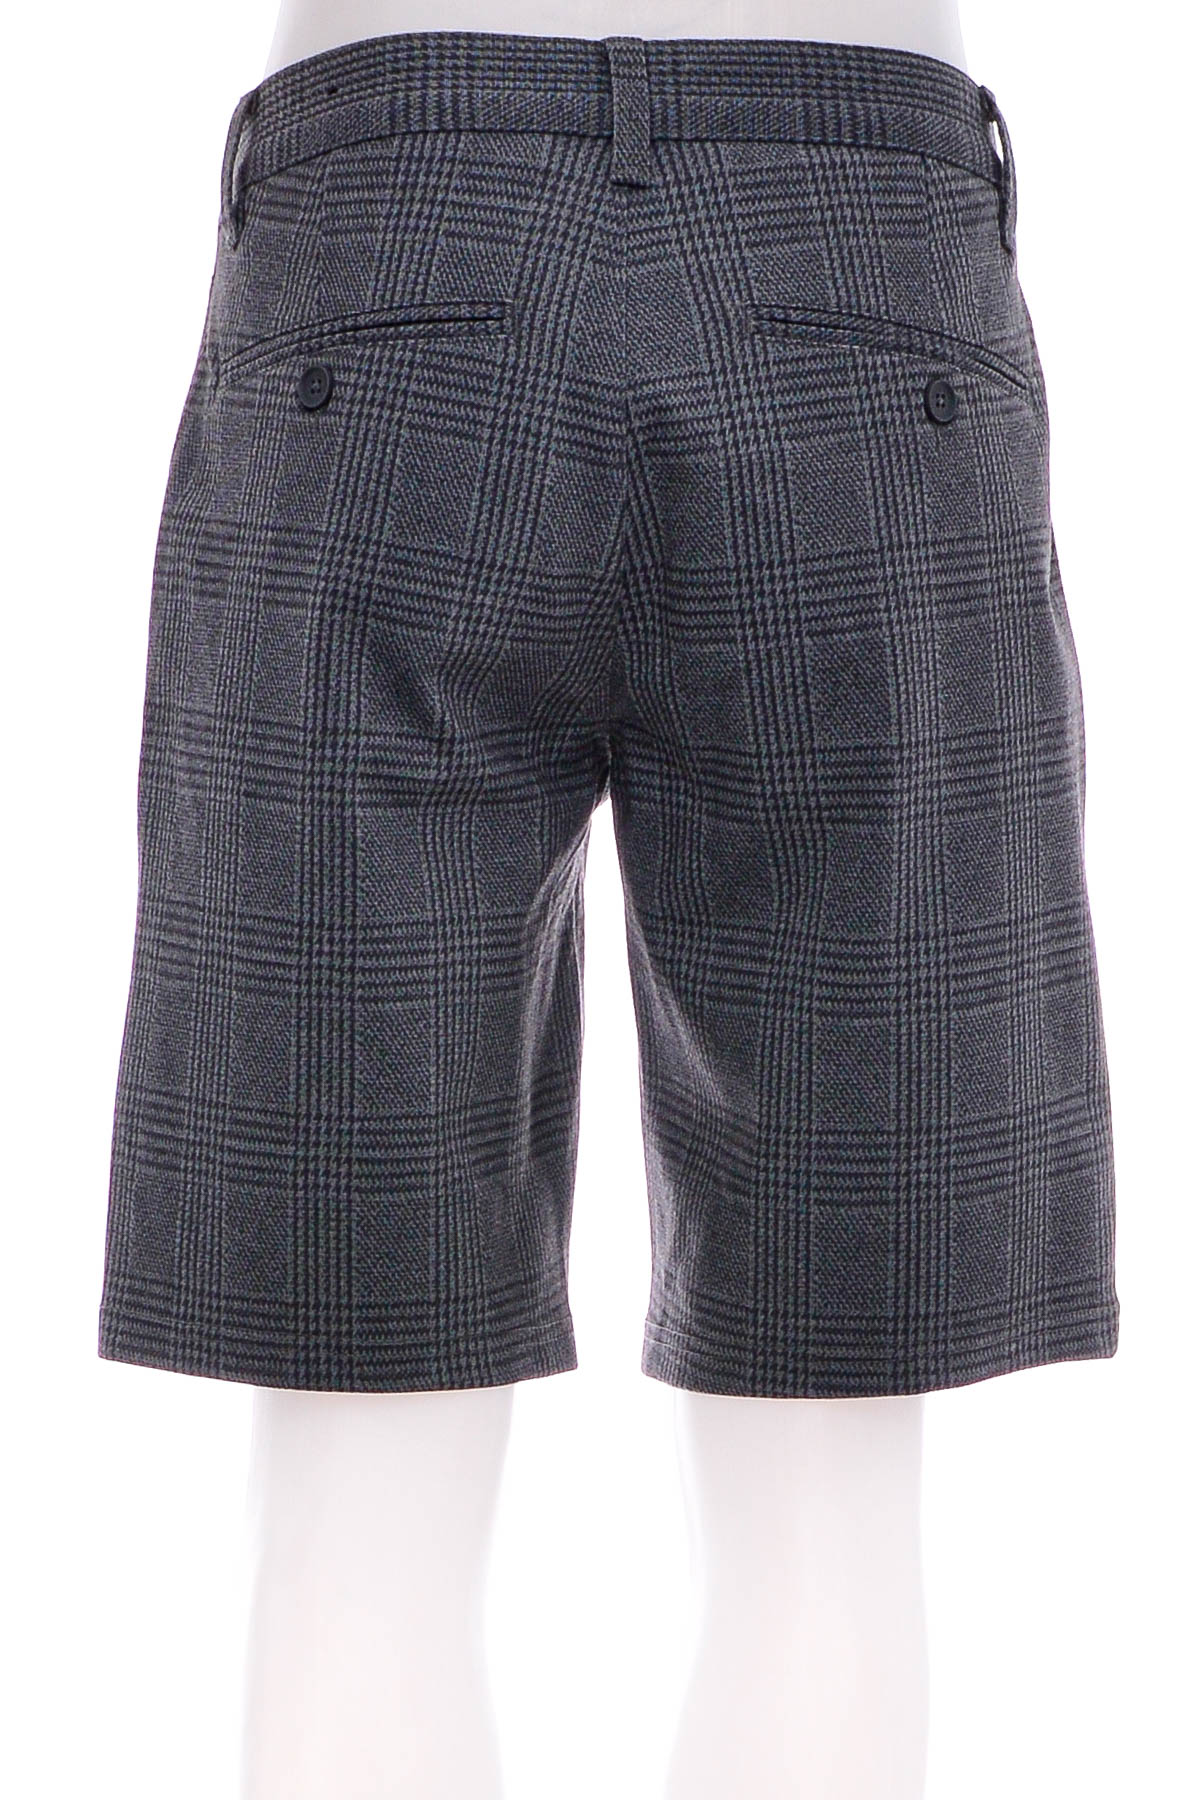 Men's shorts - ONLY & SONS - 1